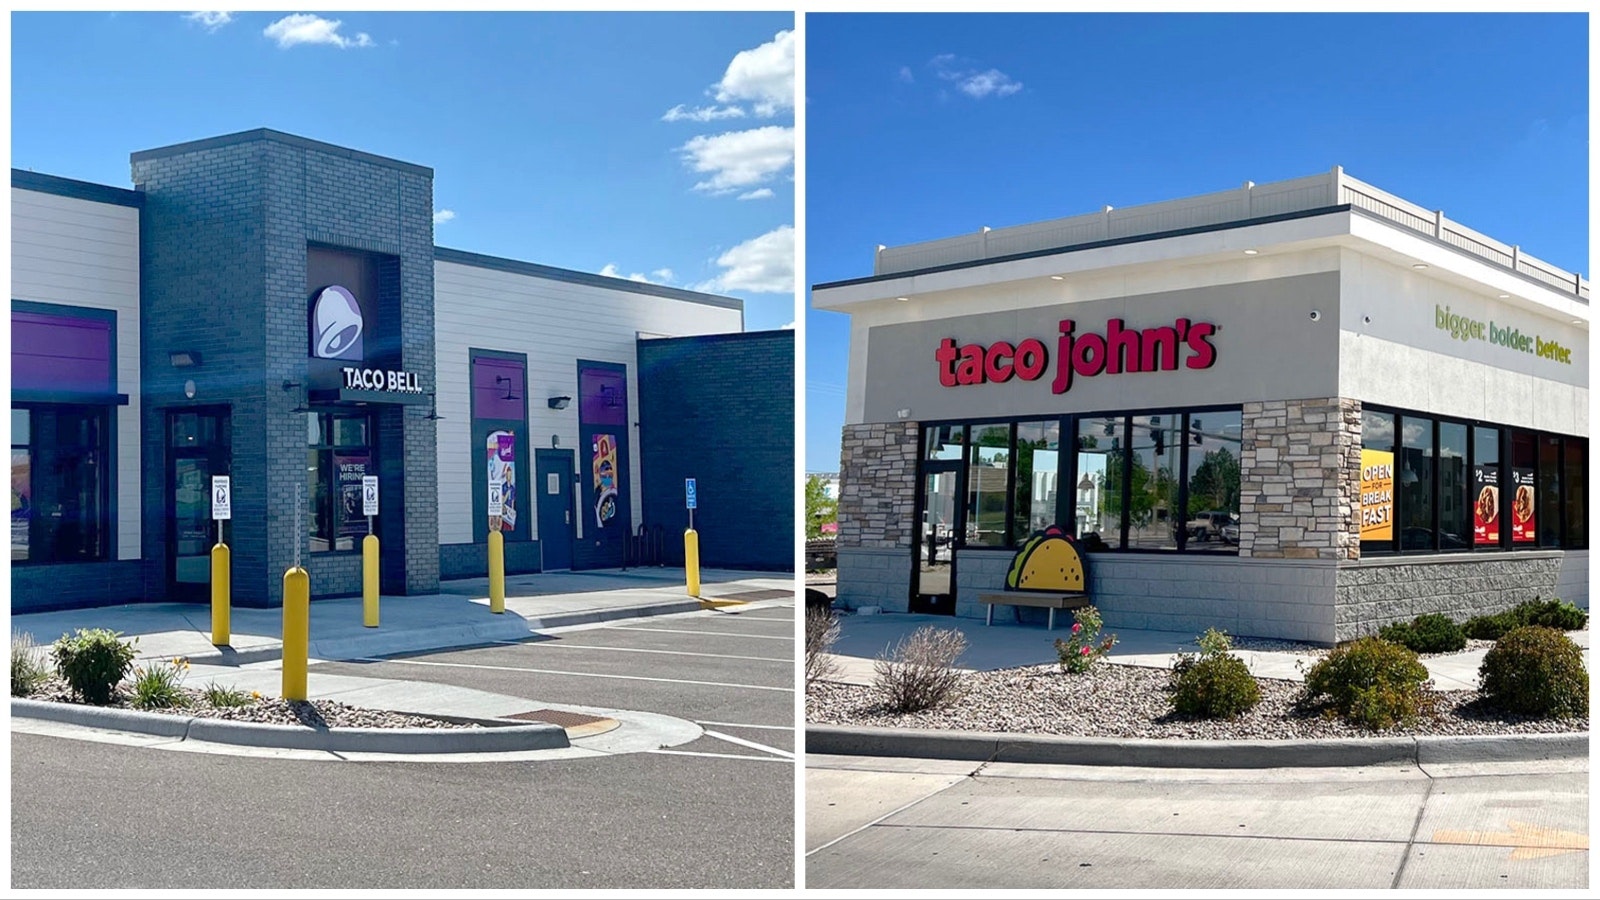 Taco John's and Taco Bell have numerous locations across Cheyenne and Wyoming.